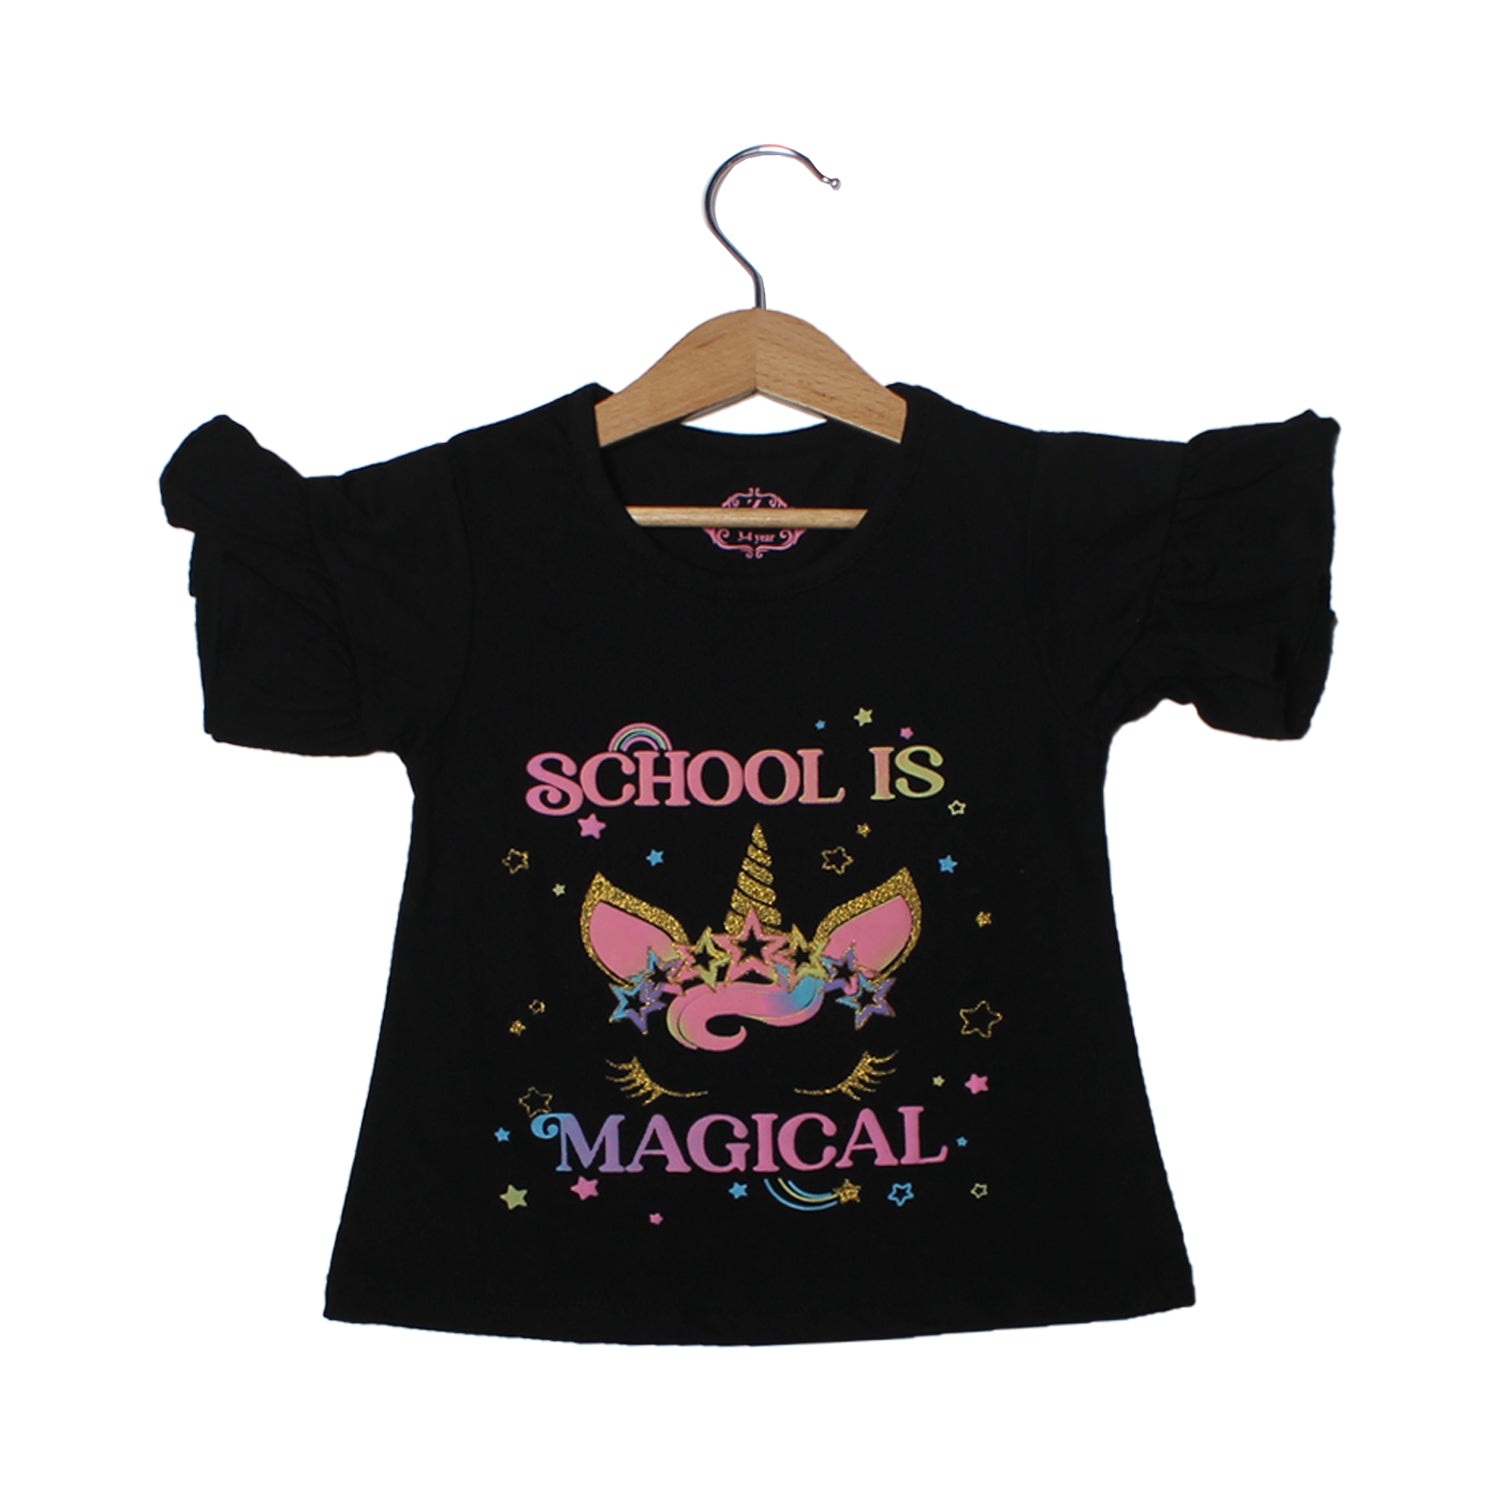 NEW BLACK SCHOOL IS MAGICAL PRINTED T-SHIRT TOP FOR GIRLS